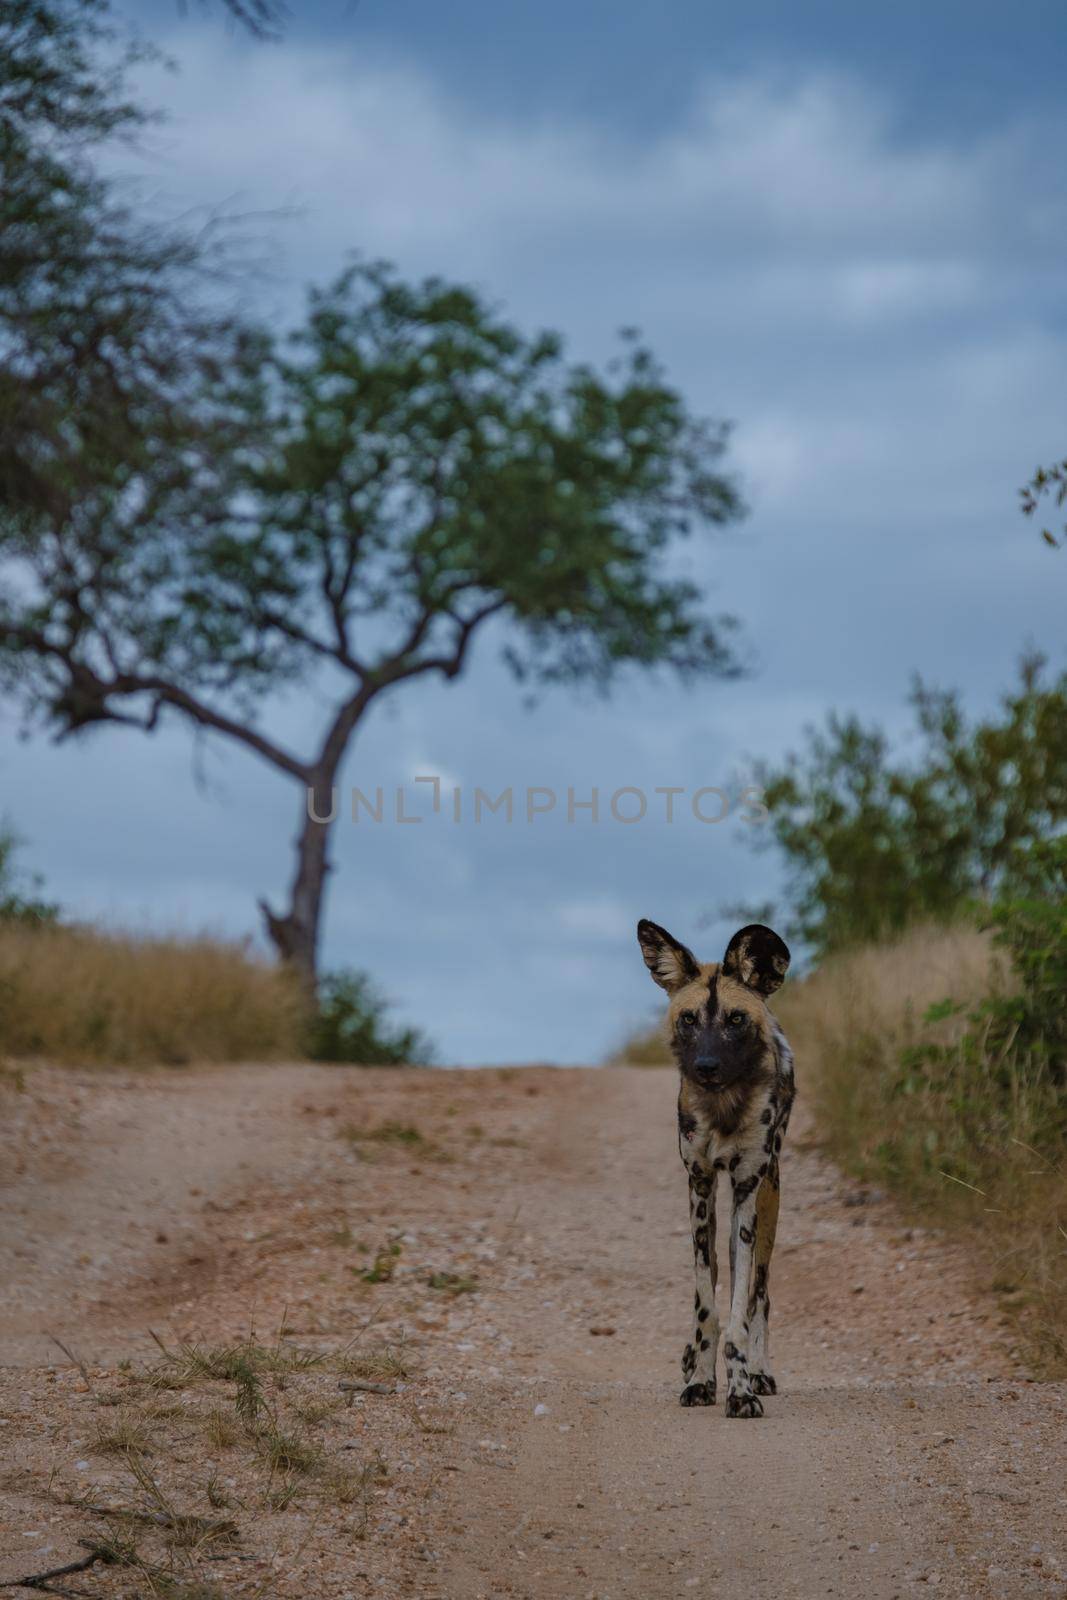 Wild dog at the The Klaserie Private Nature Reserve part of the Kruger national park in South Africa by fokkebok